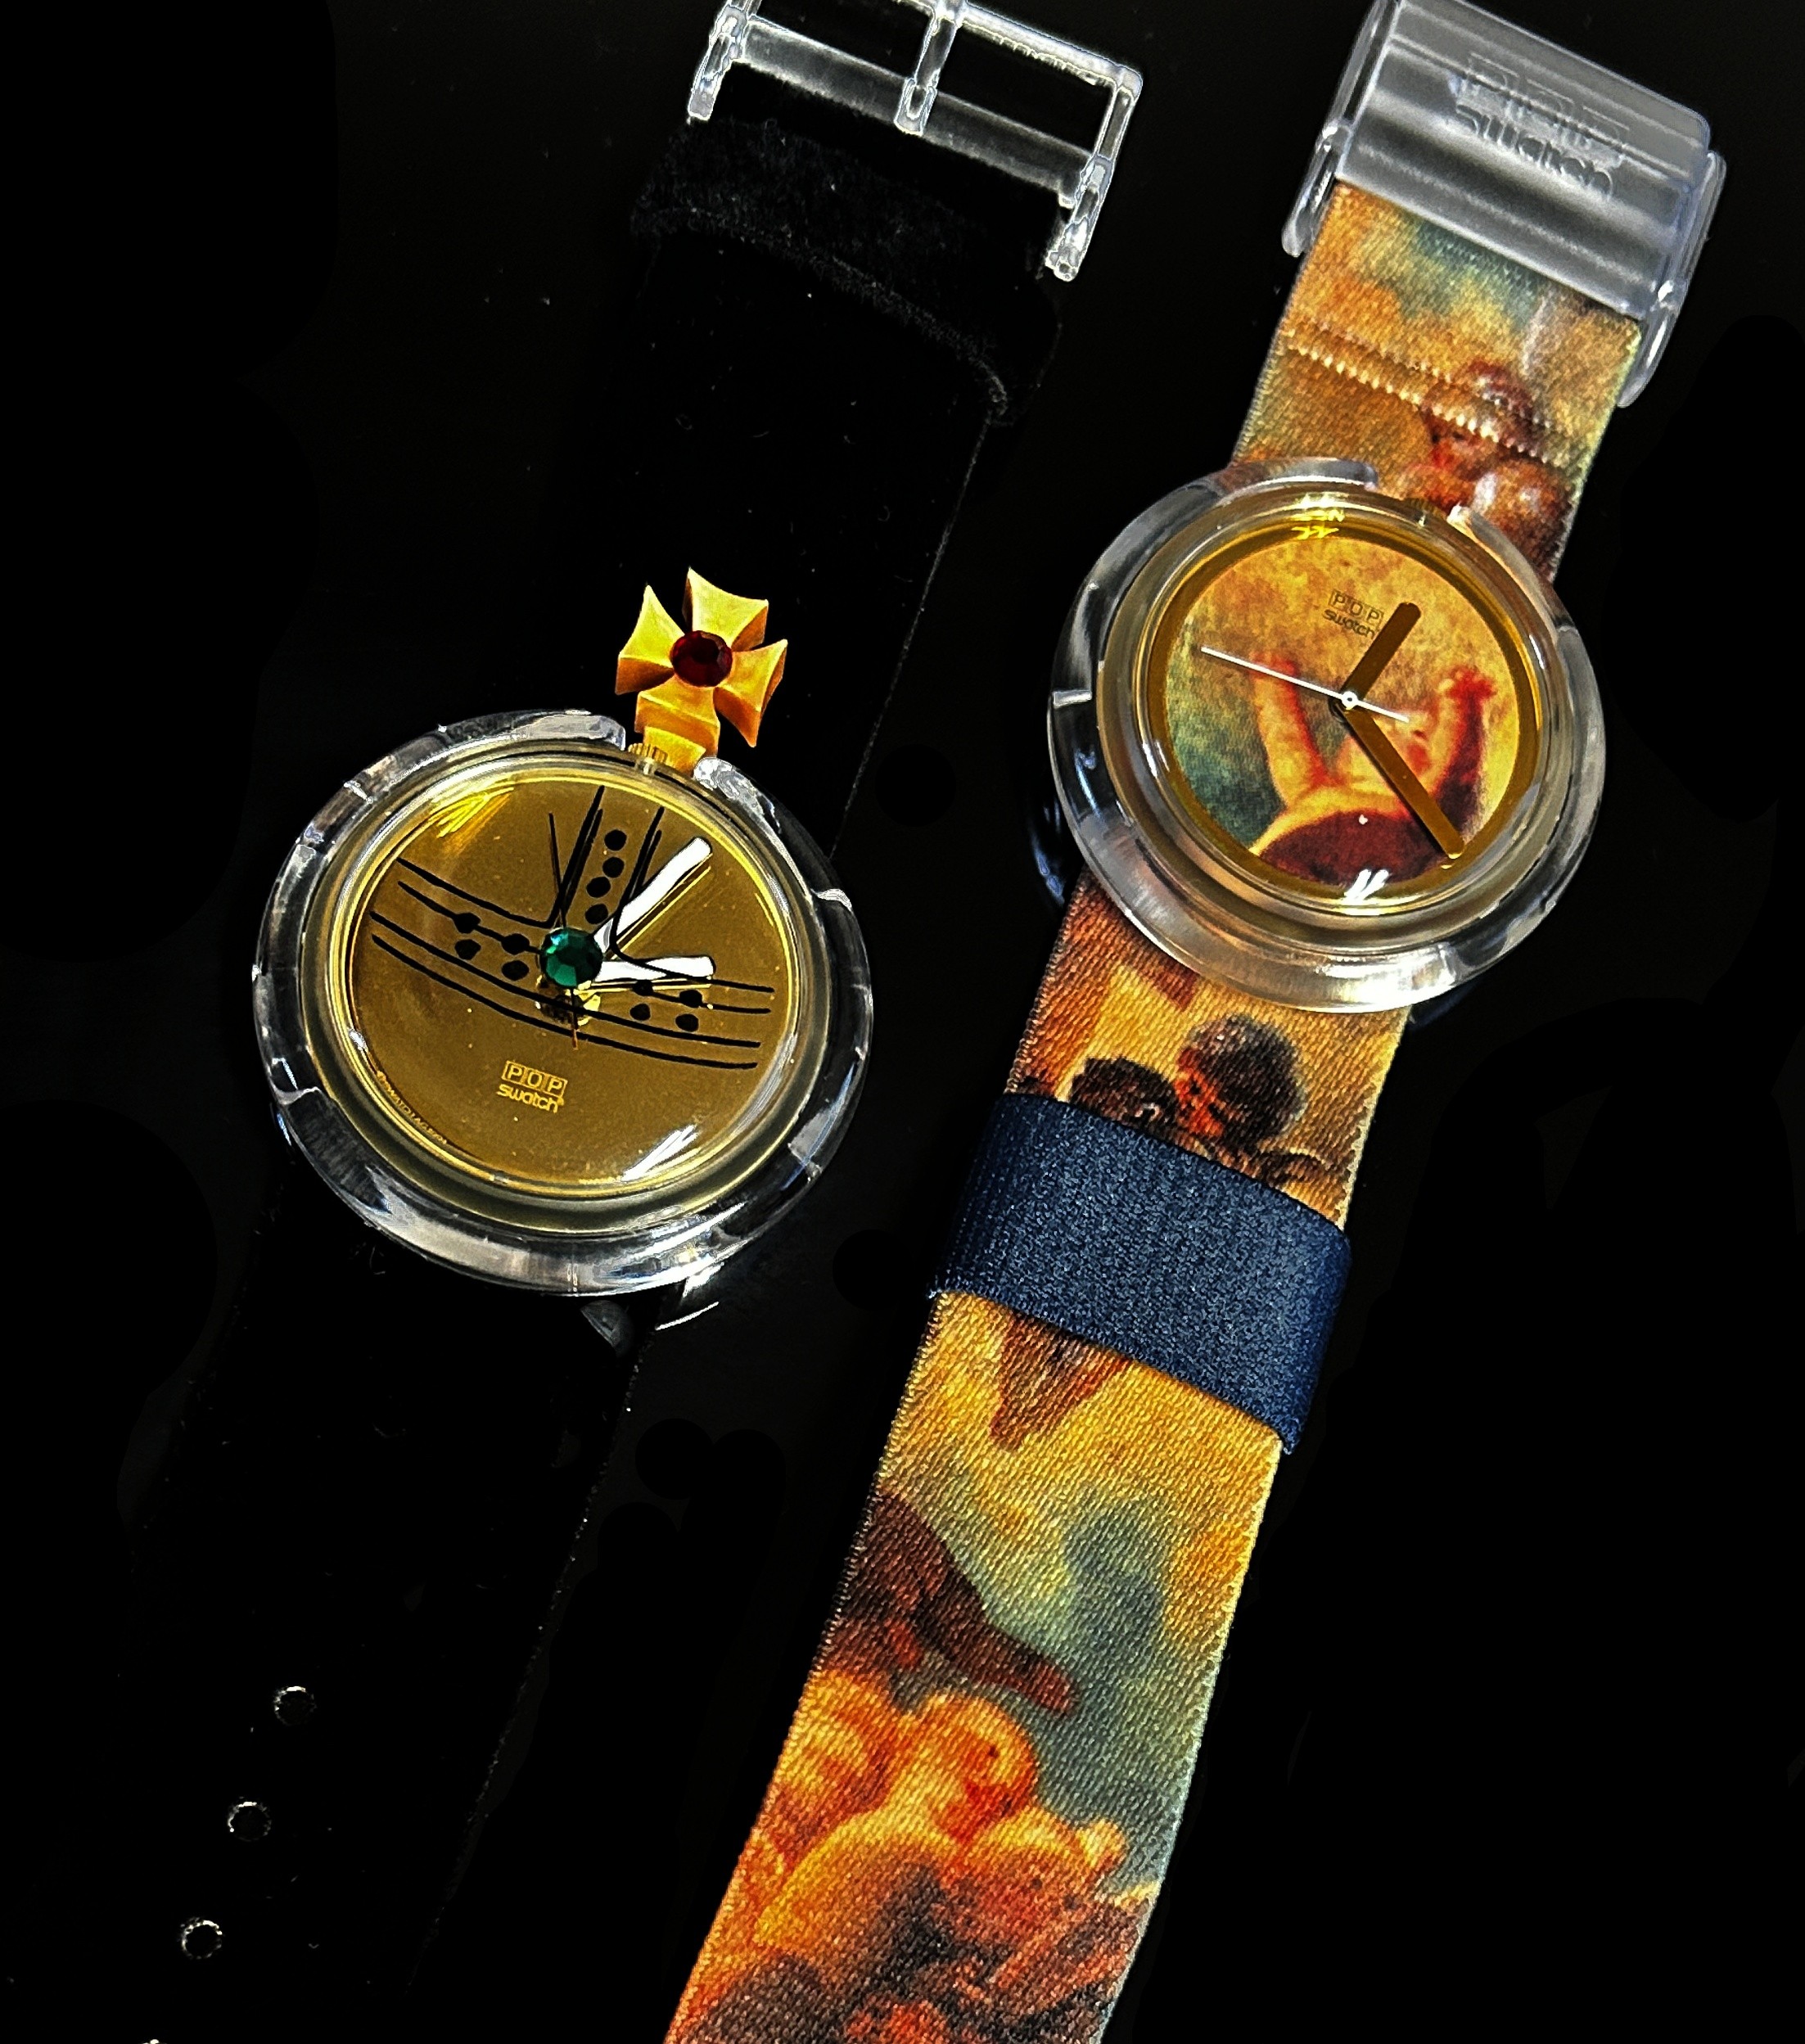 Swatch watches and accessories to include a boxed 1990’s Pop Swatch Orb quartz wristwatch designed